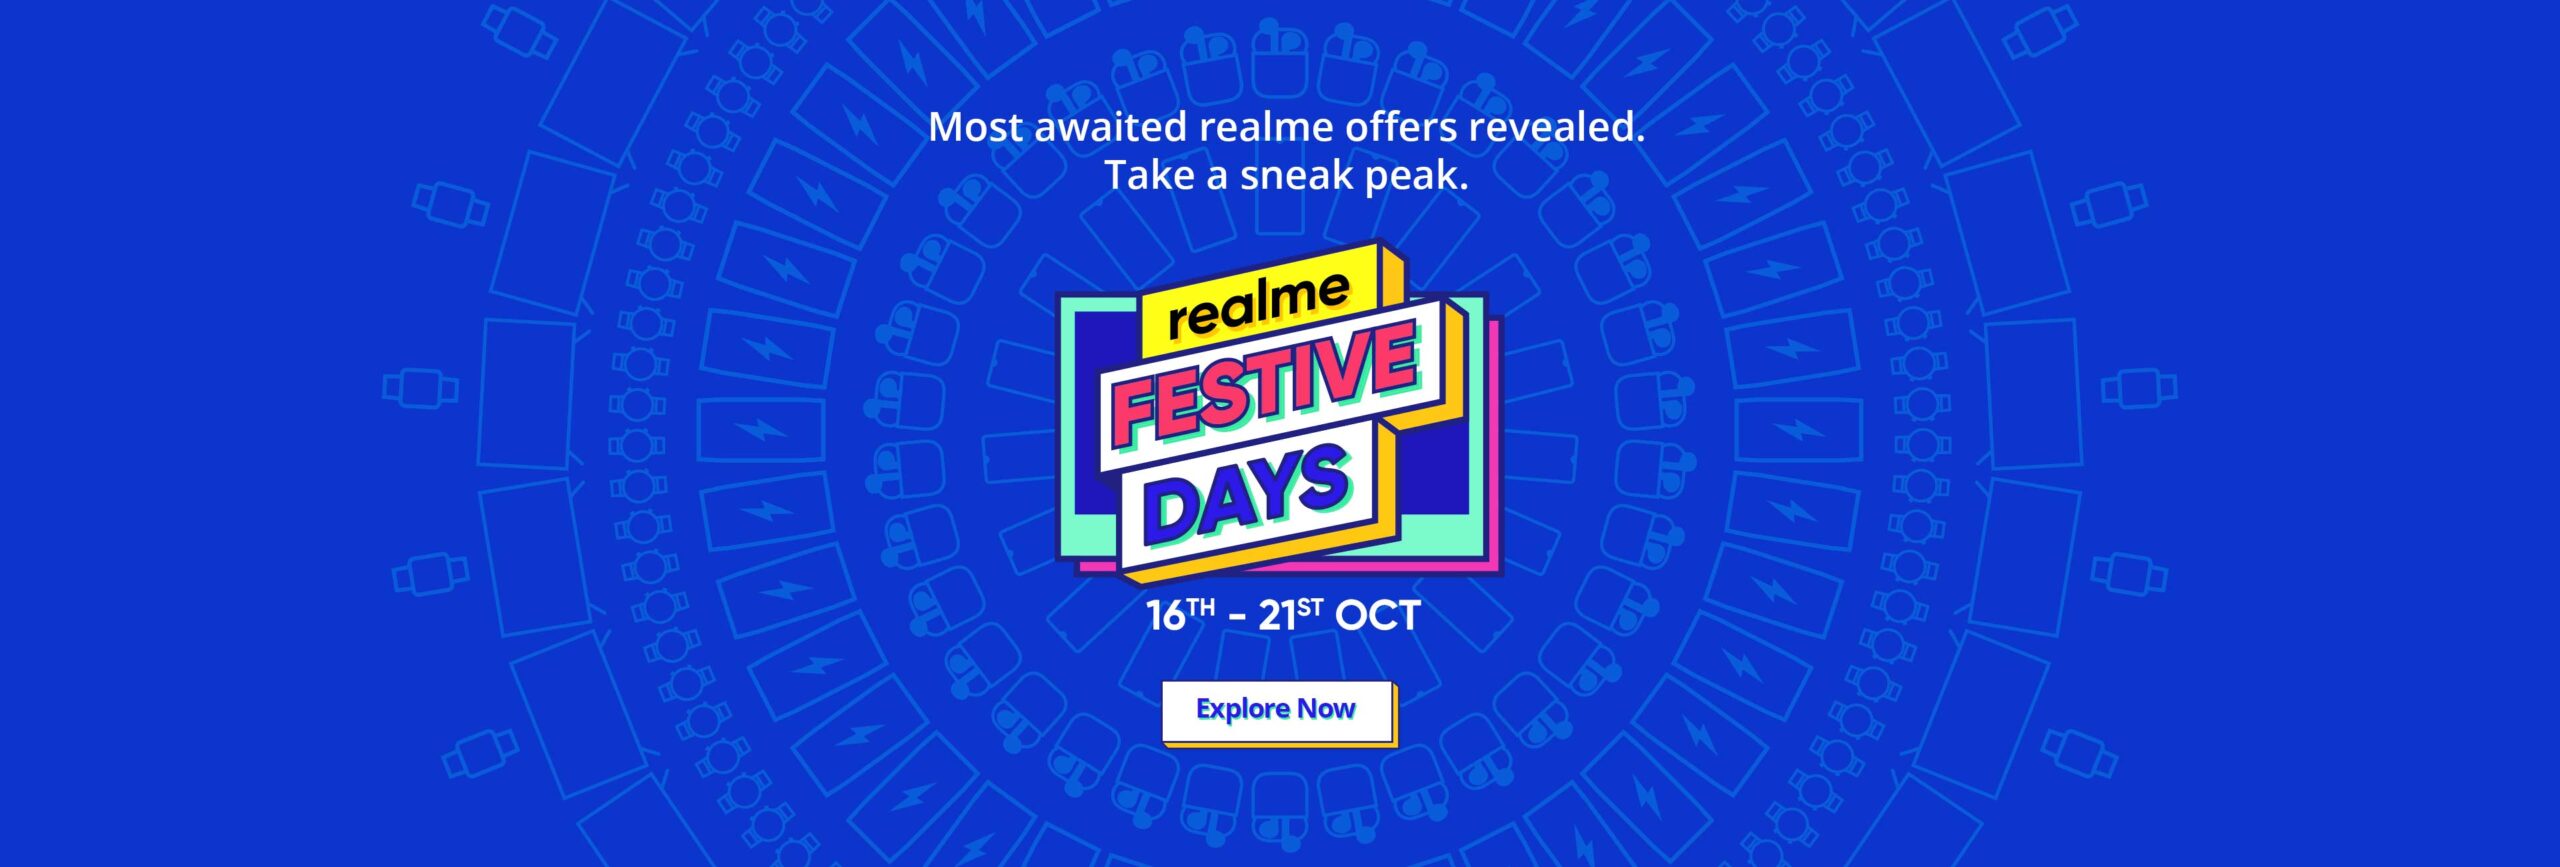 Realme Festive Days scheduled from 16th to 21st October, Know more about the best offerings.